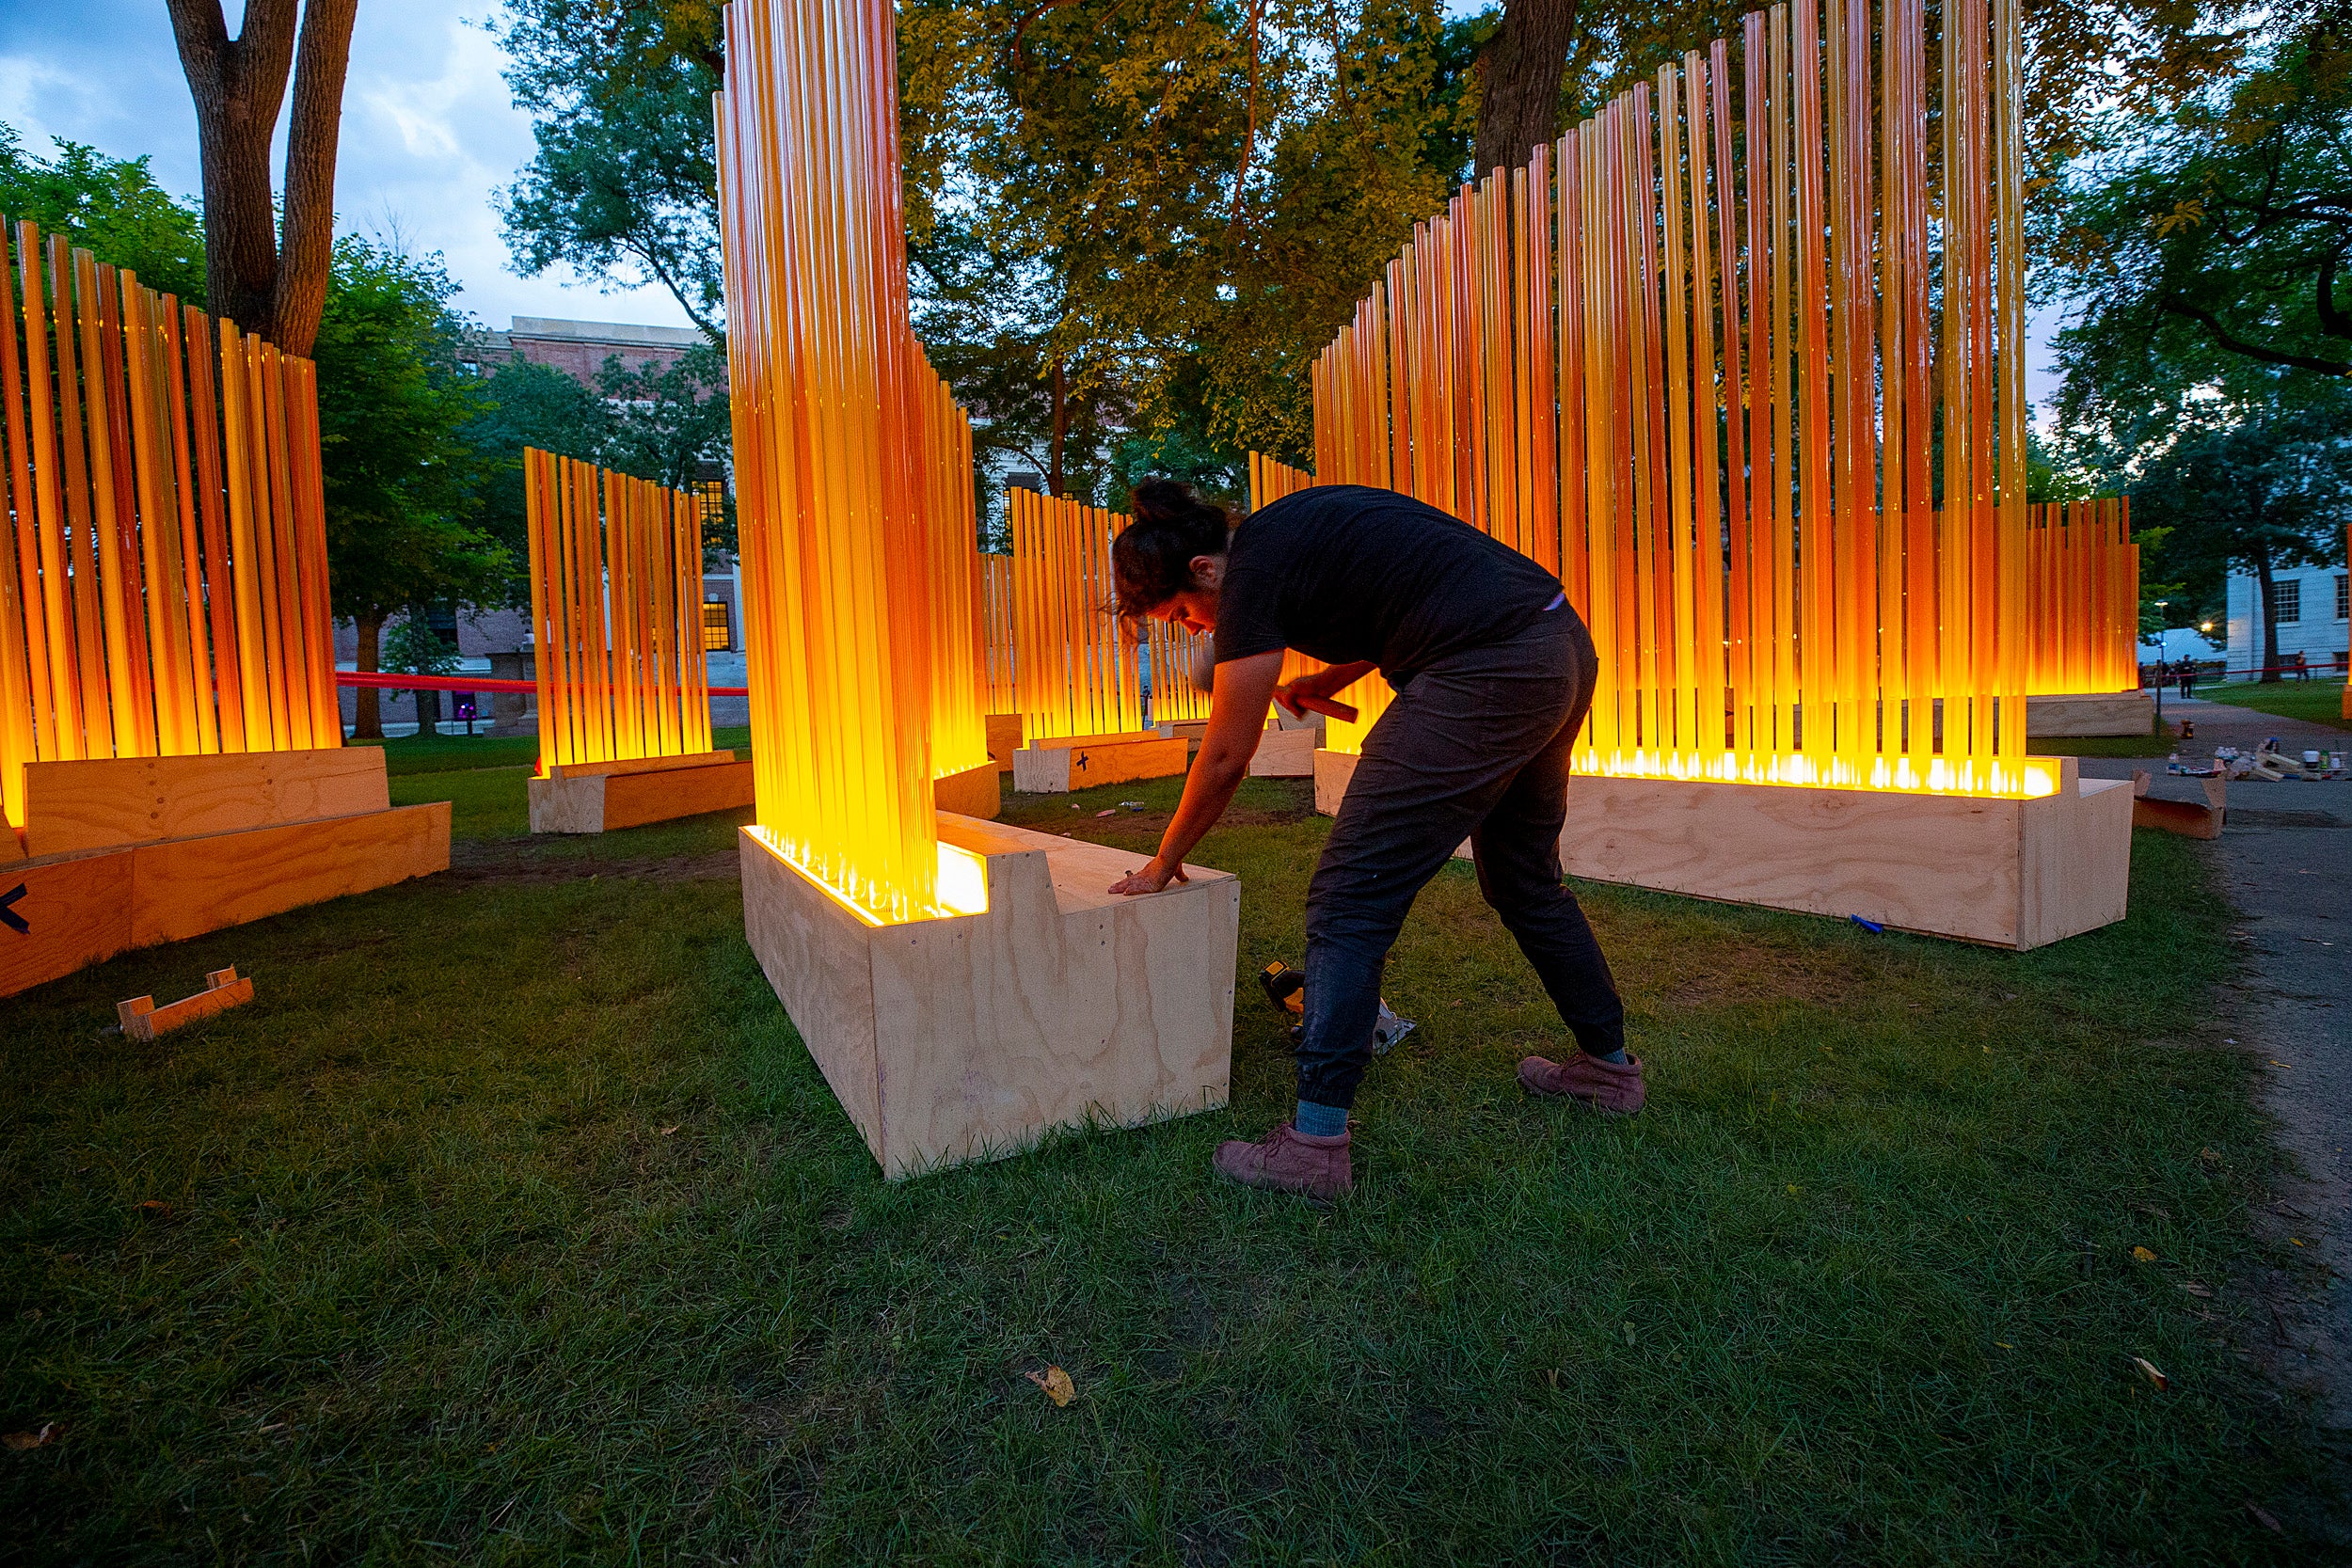 A woman putting the art installation together